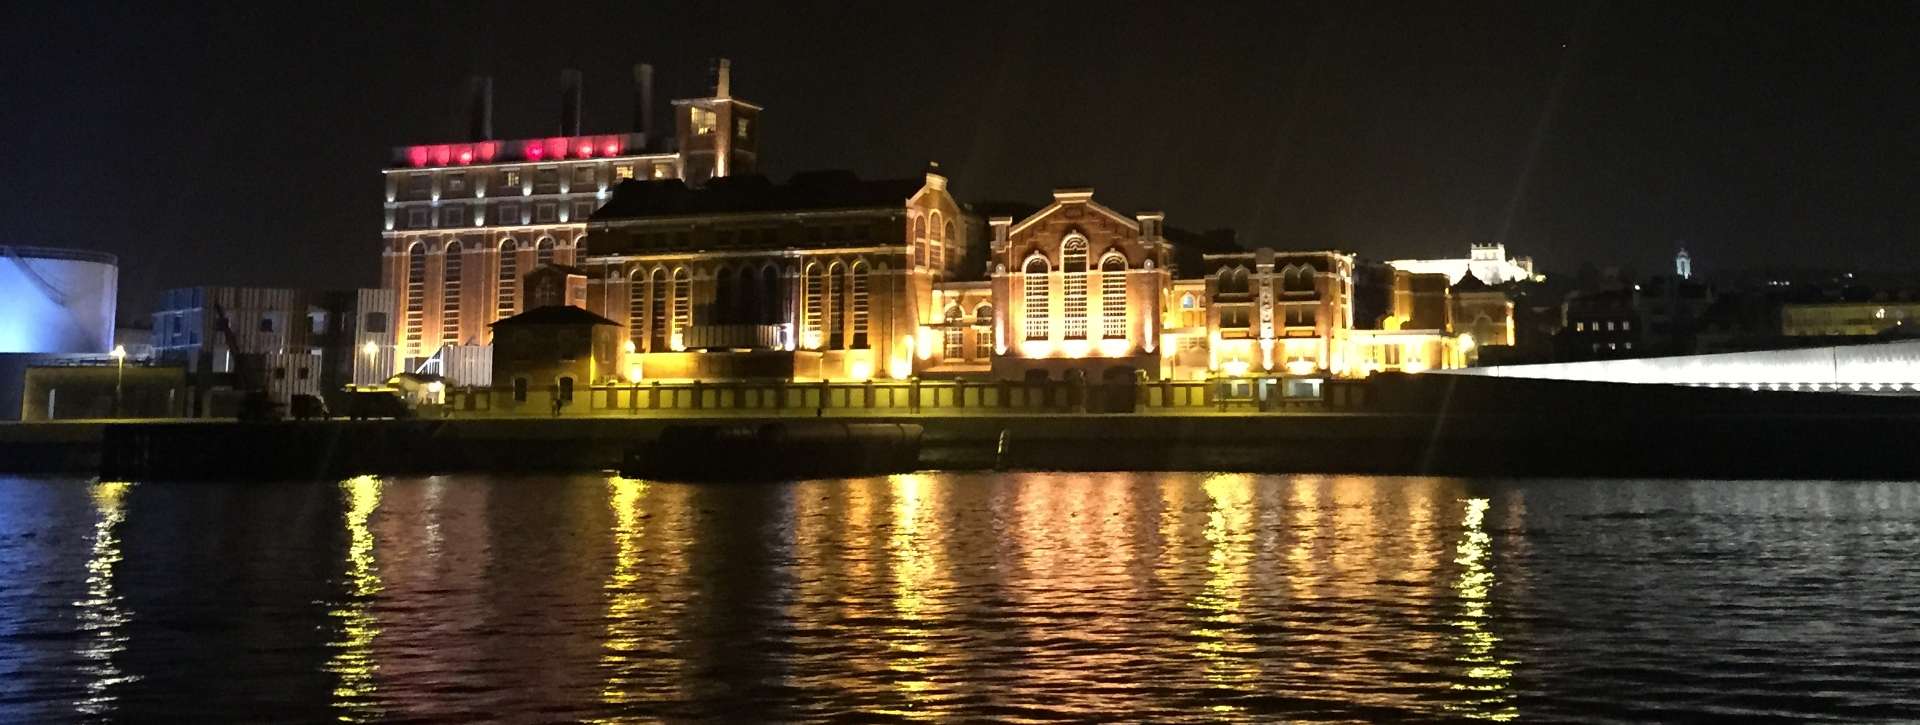 Night Lisbon Cruise view, the electricity museum